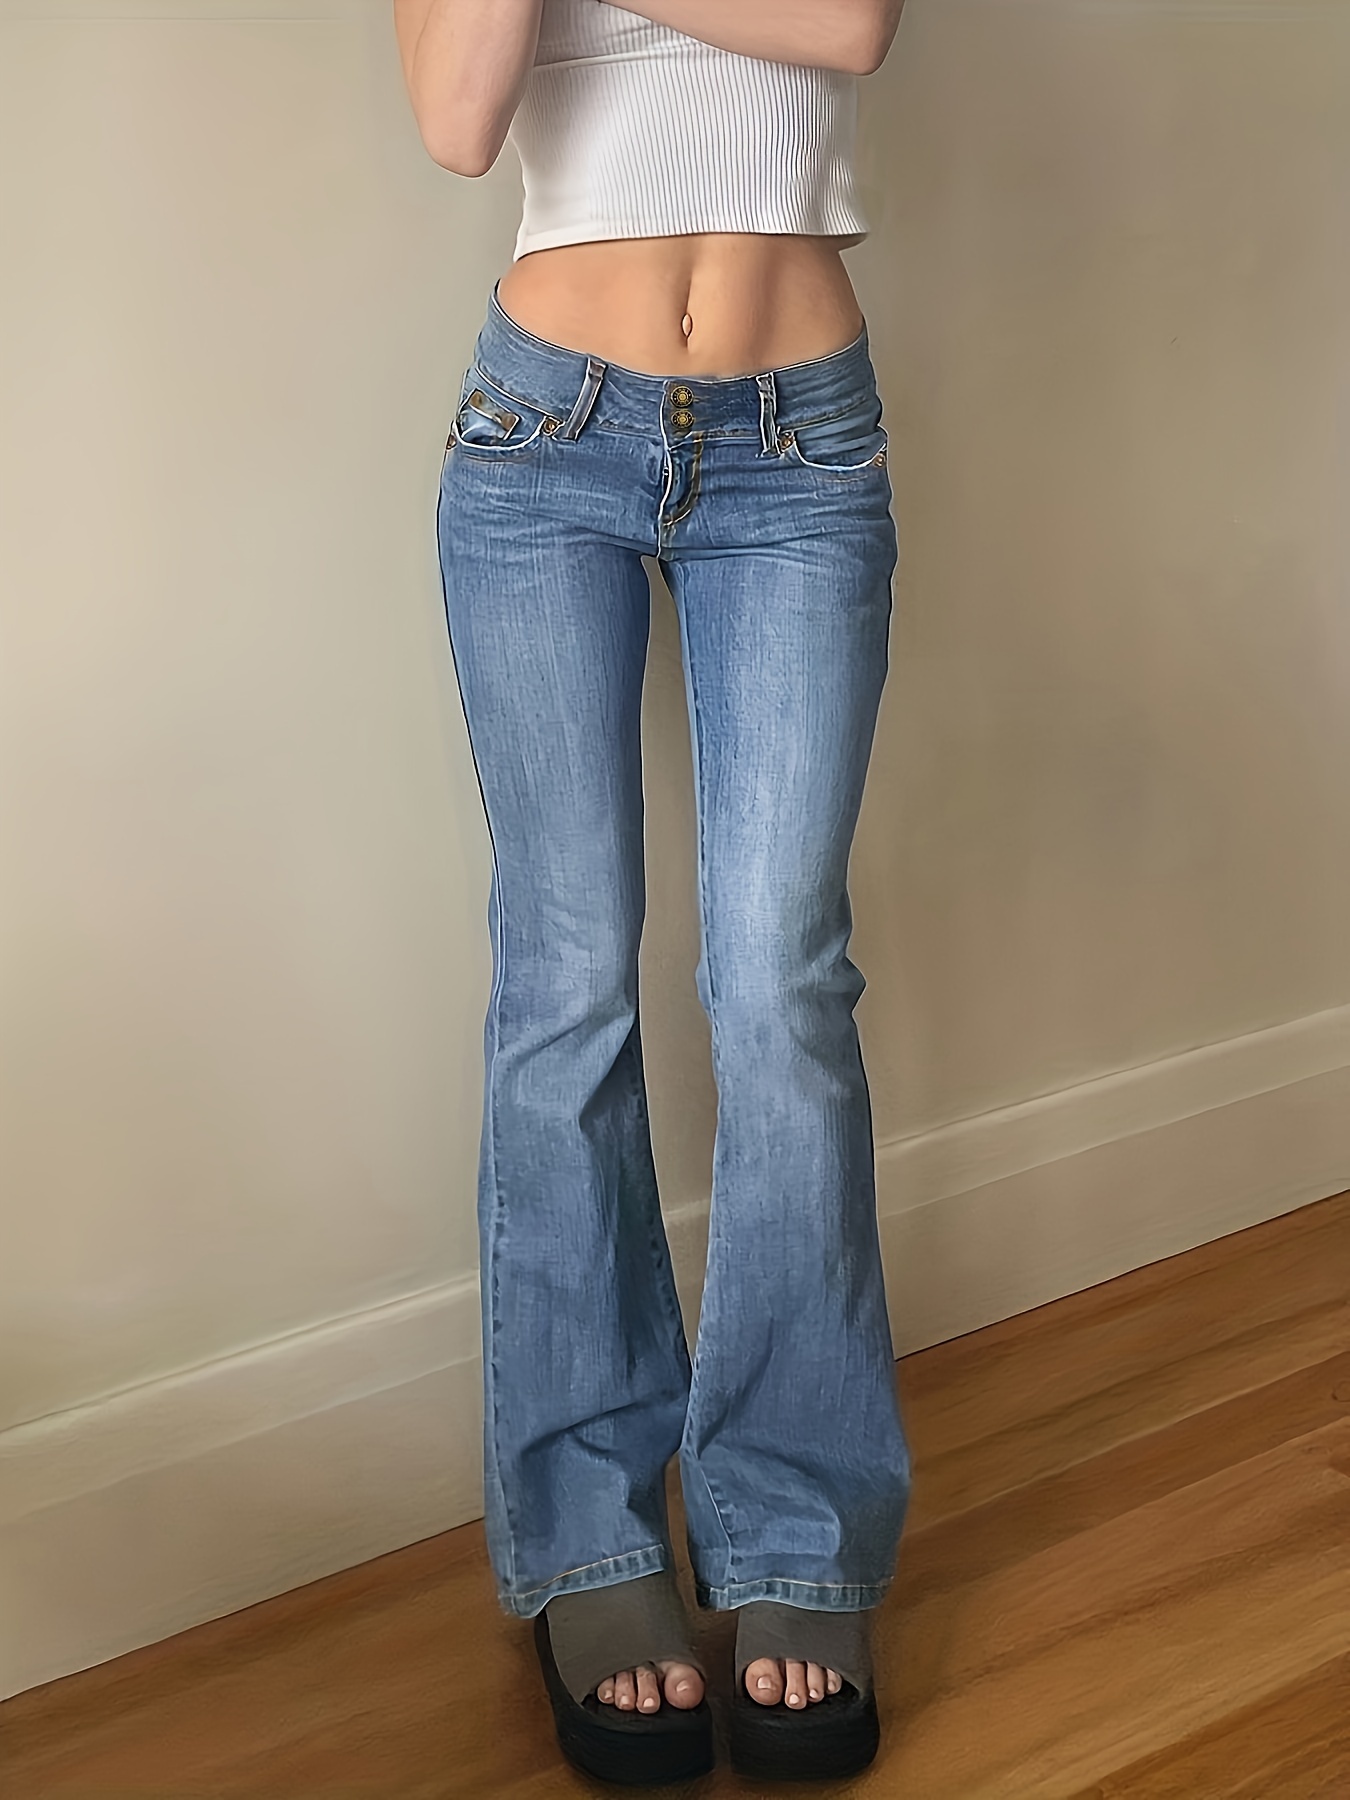 Women's Bootcut Jeans Stretchy Denim Pants Ladies Low Waist Flared Trousers